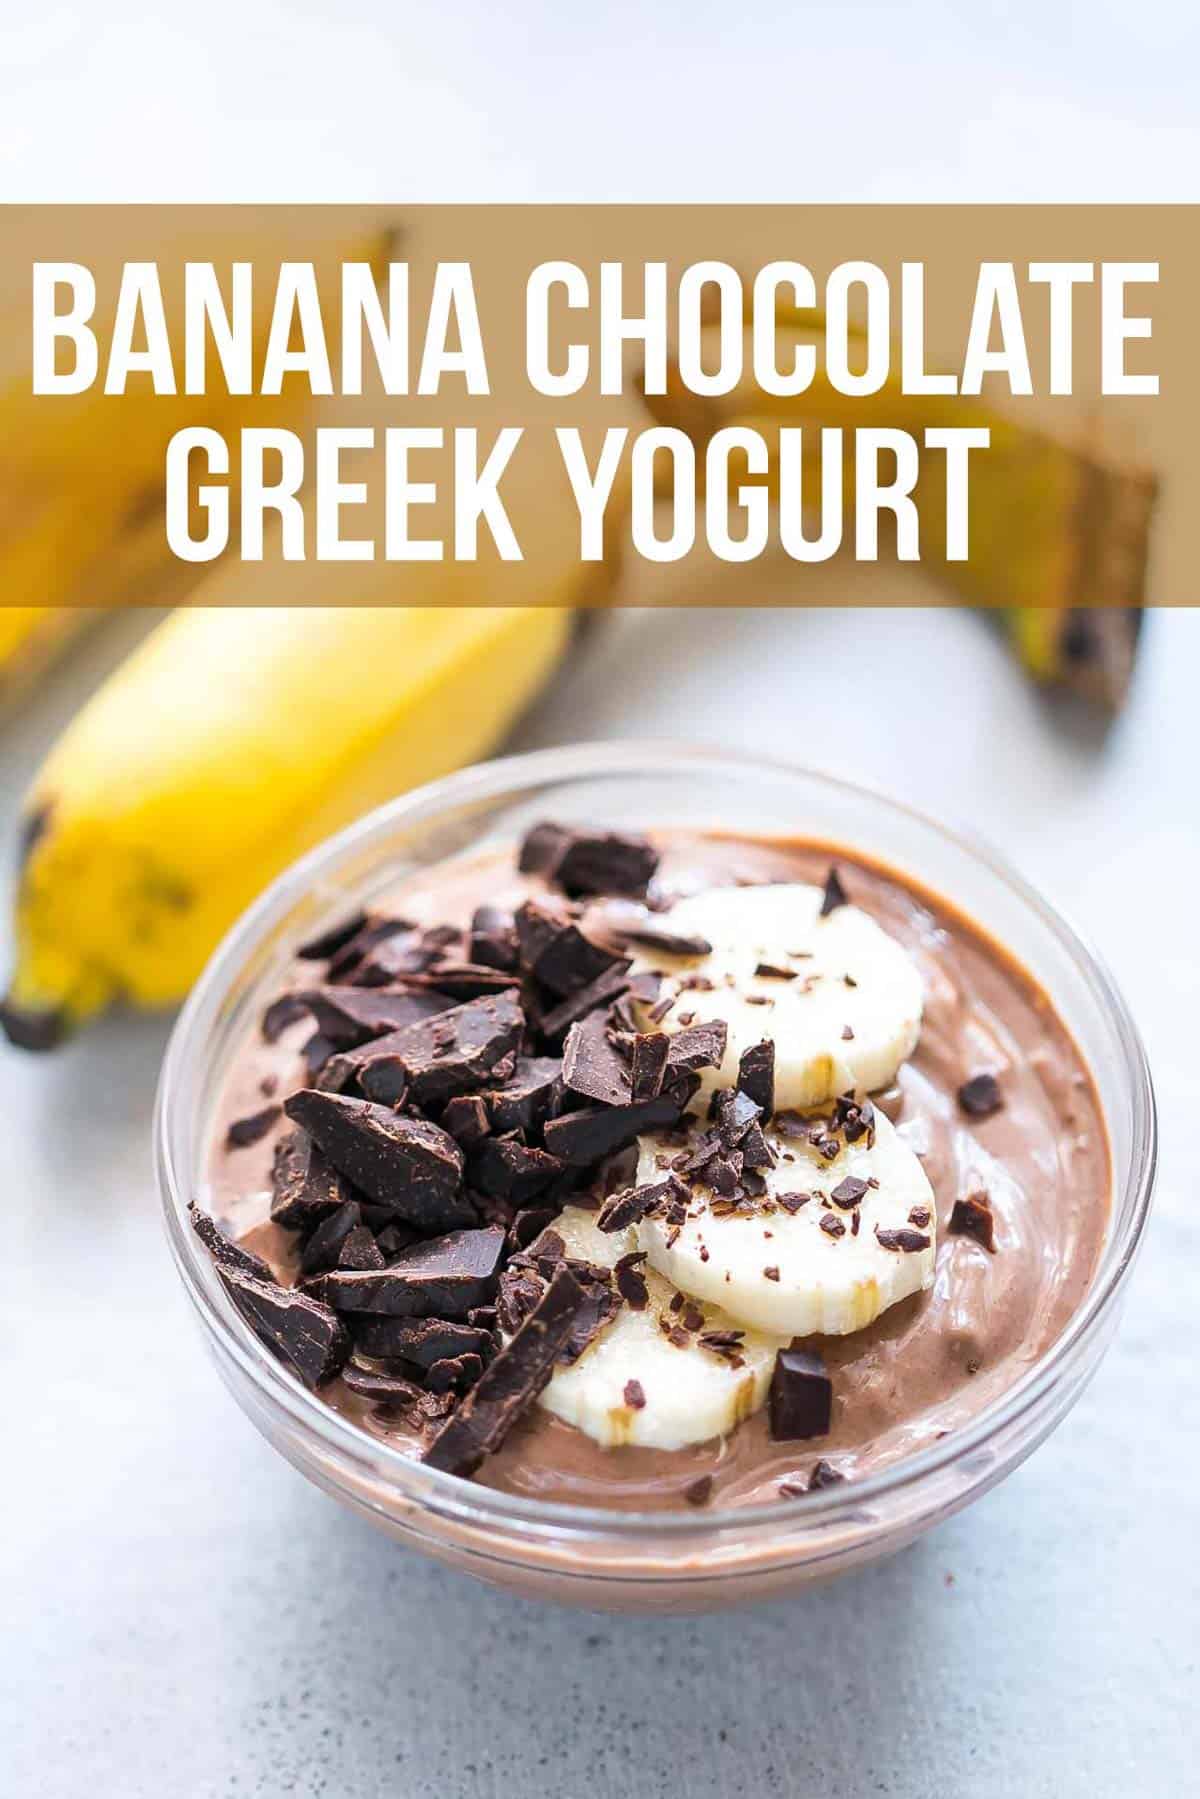 Banana Chocolate greek yogurt topped with grated chocolate and bananas and served in a bowl